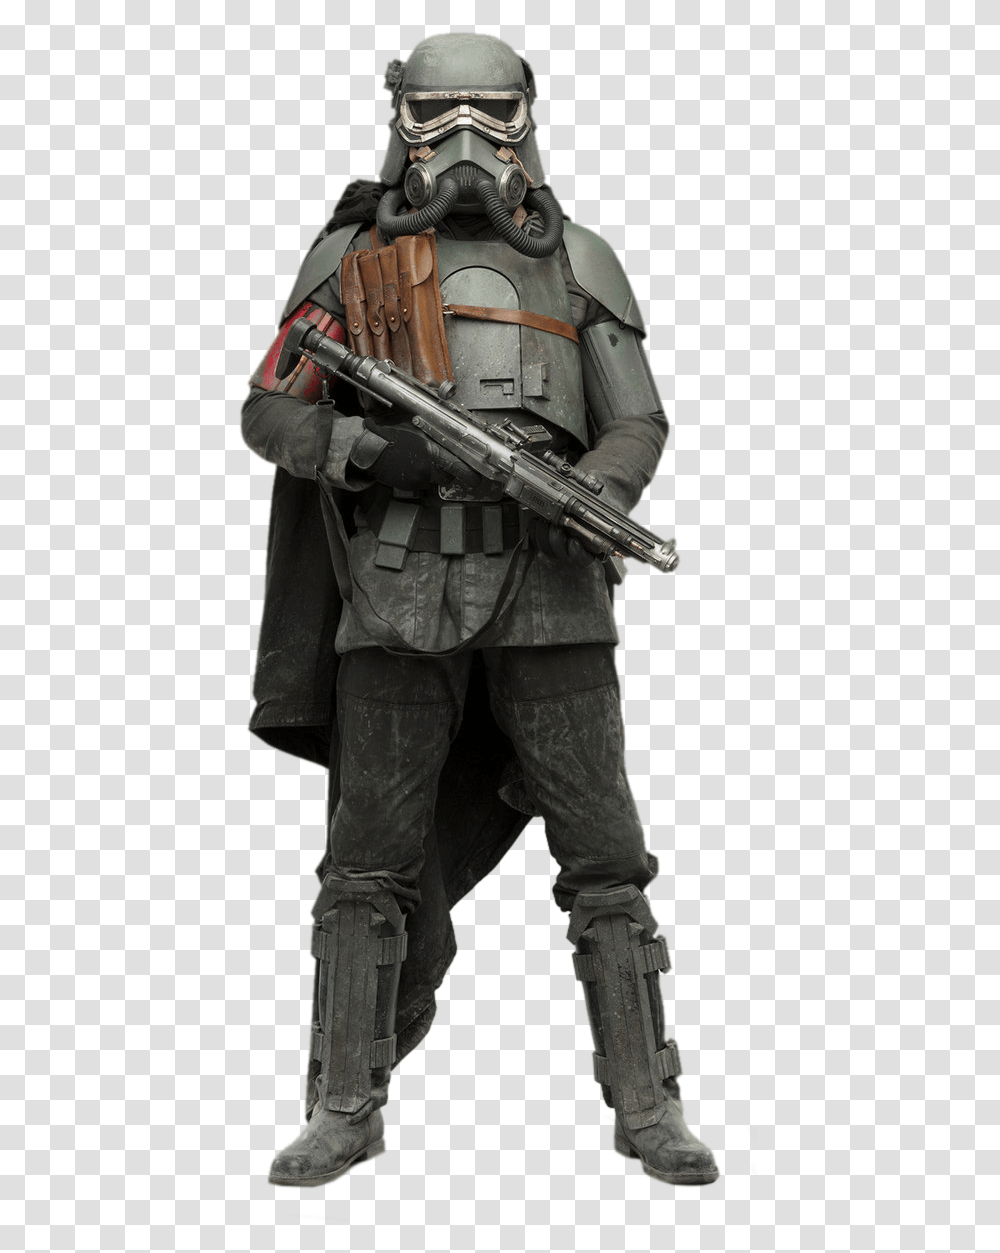 Star Wars Characters Mud Trooper Star Wars Solo, Gun, Weapon, Person, Military Uniform Transparent Png